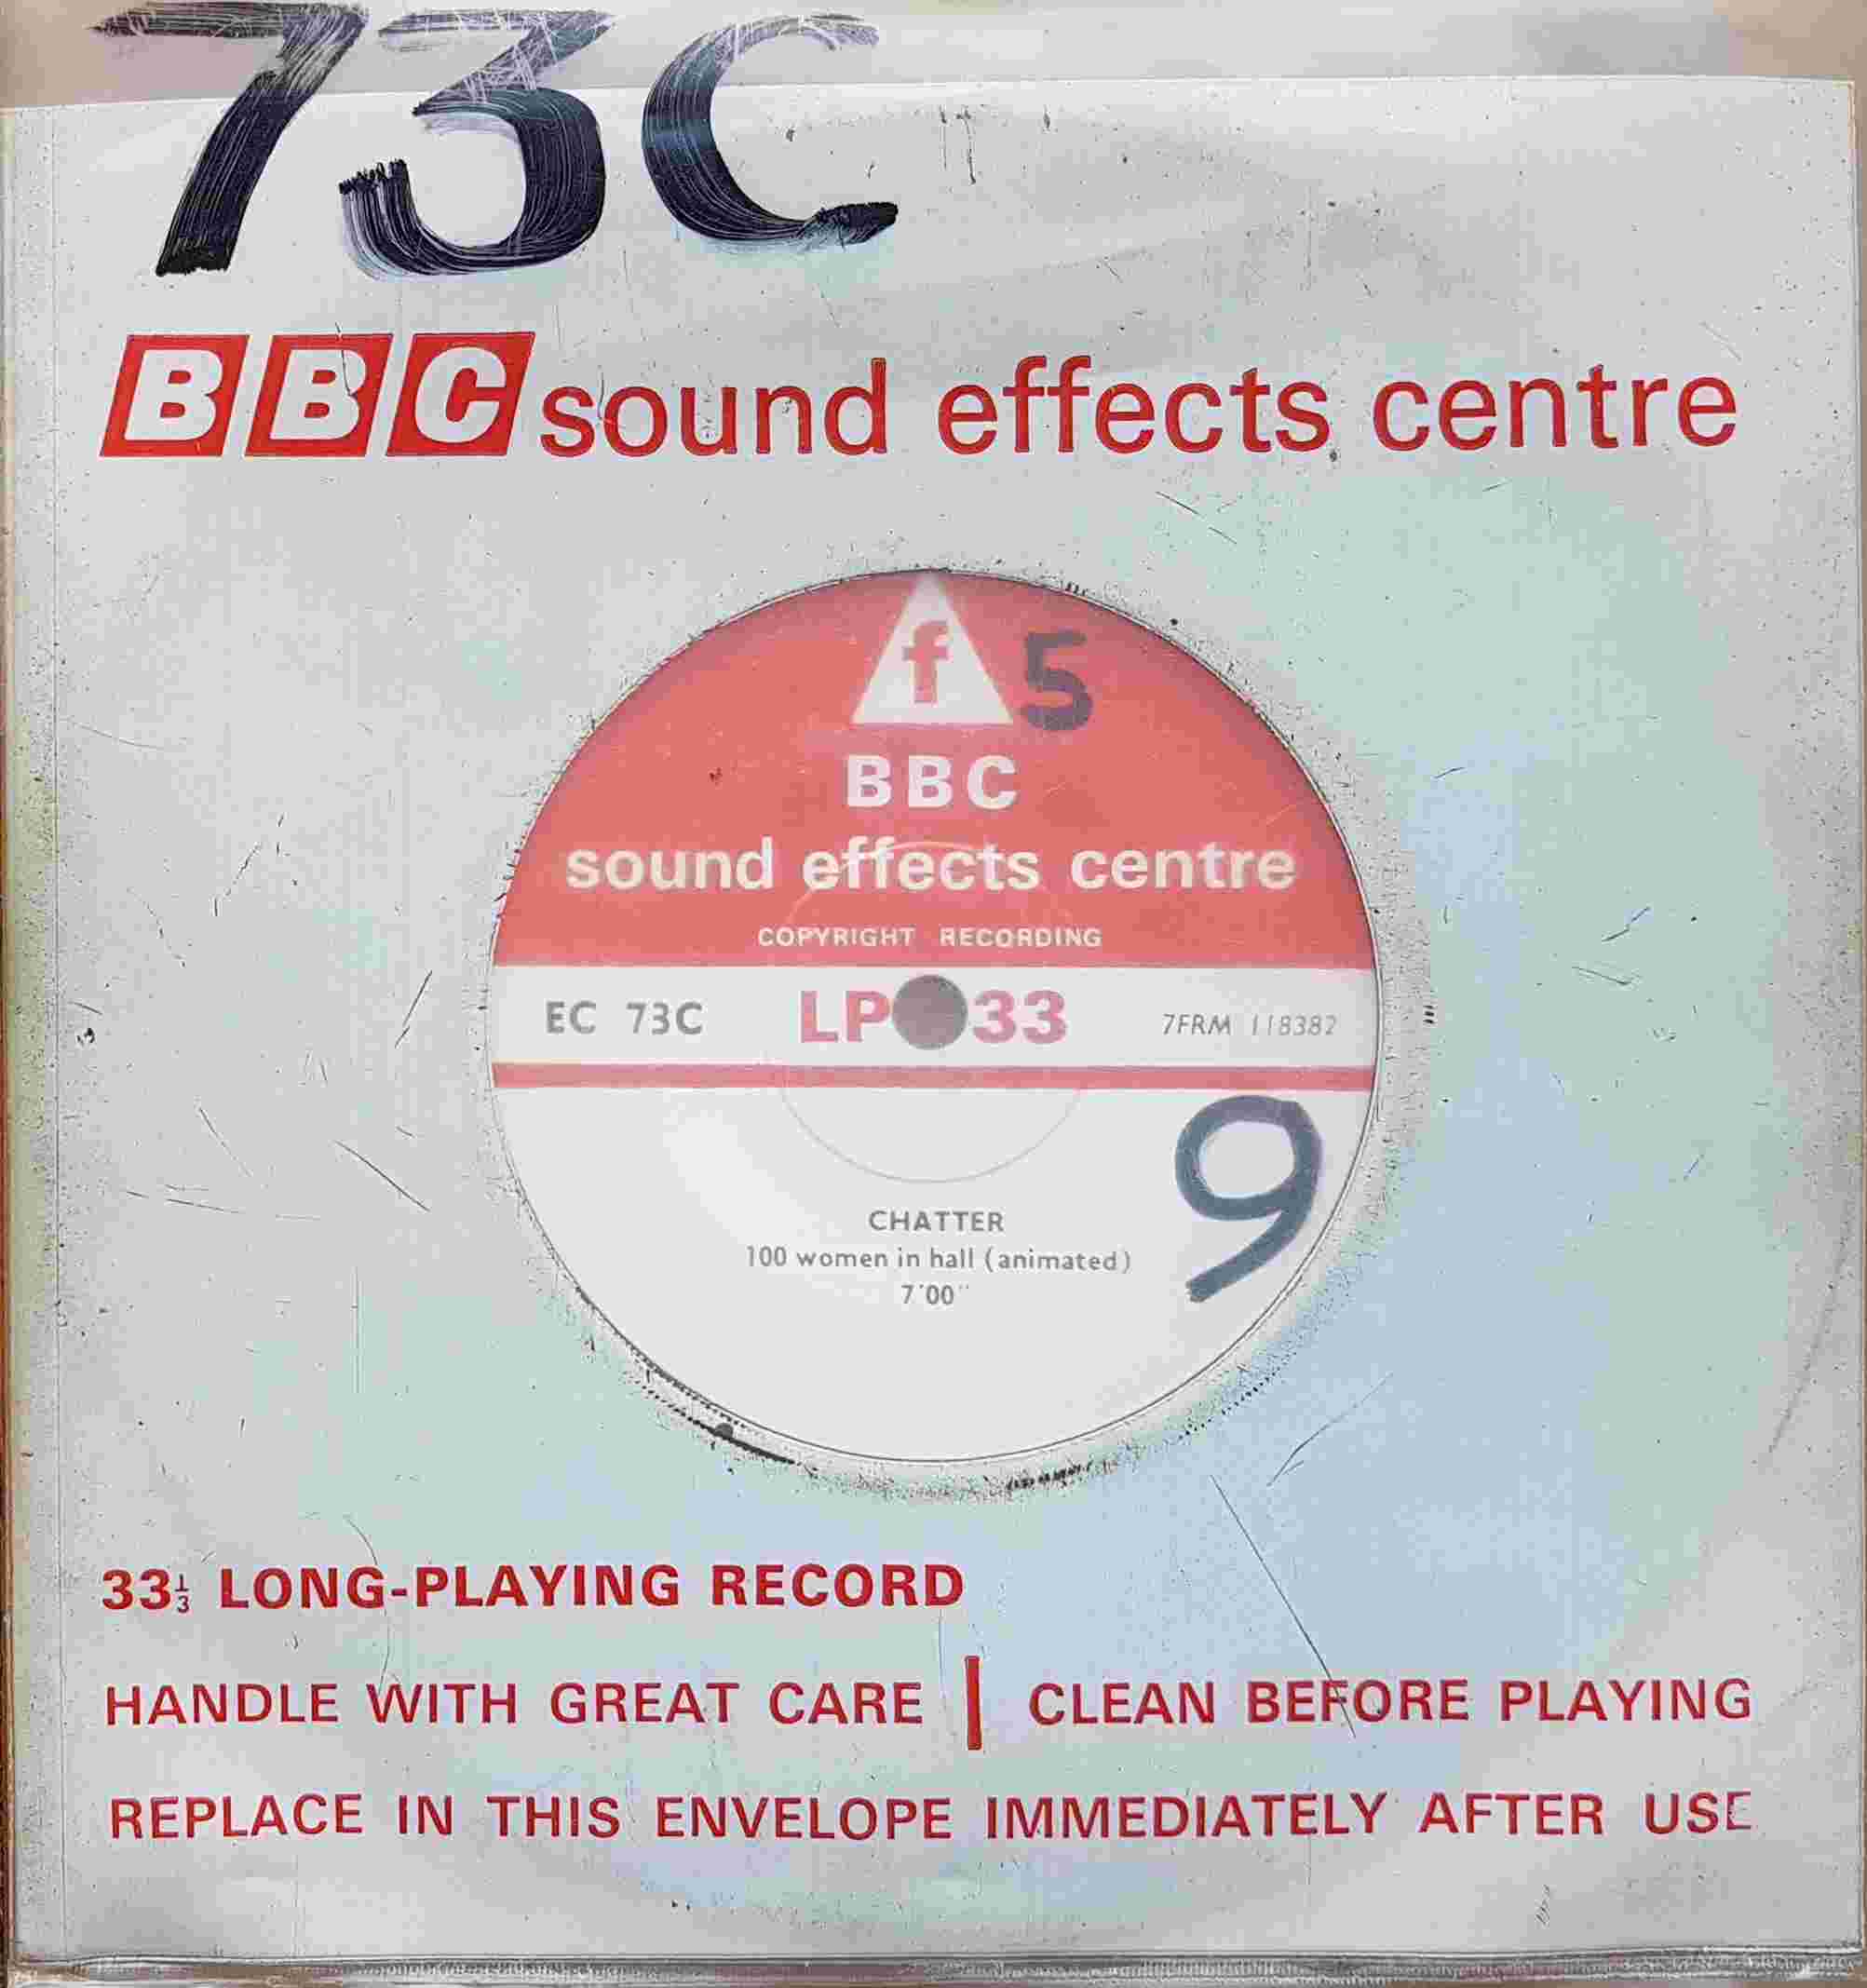 Picture of EC 73C Chatter by artist Not registered from the BBC records and Tapes library